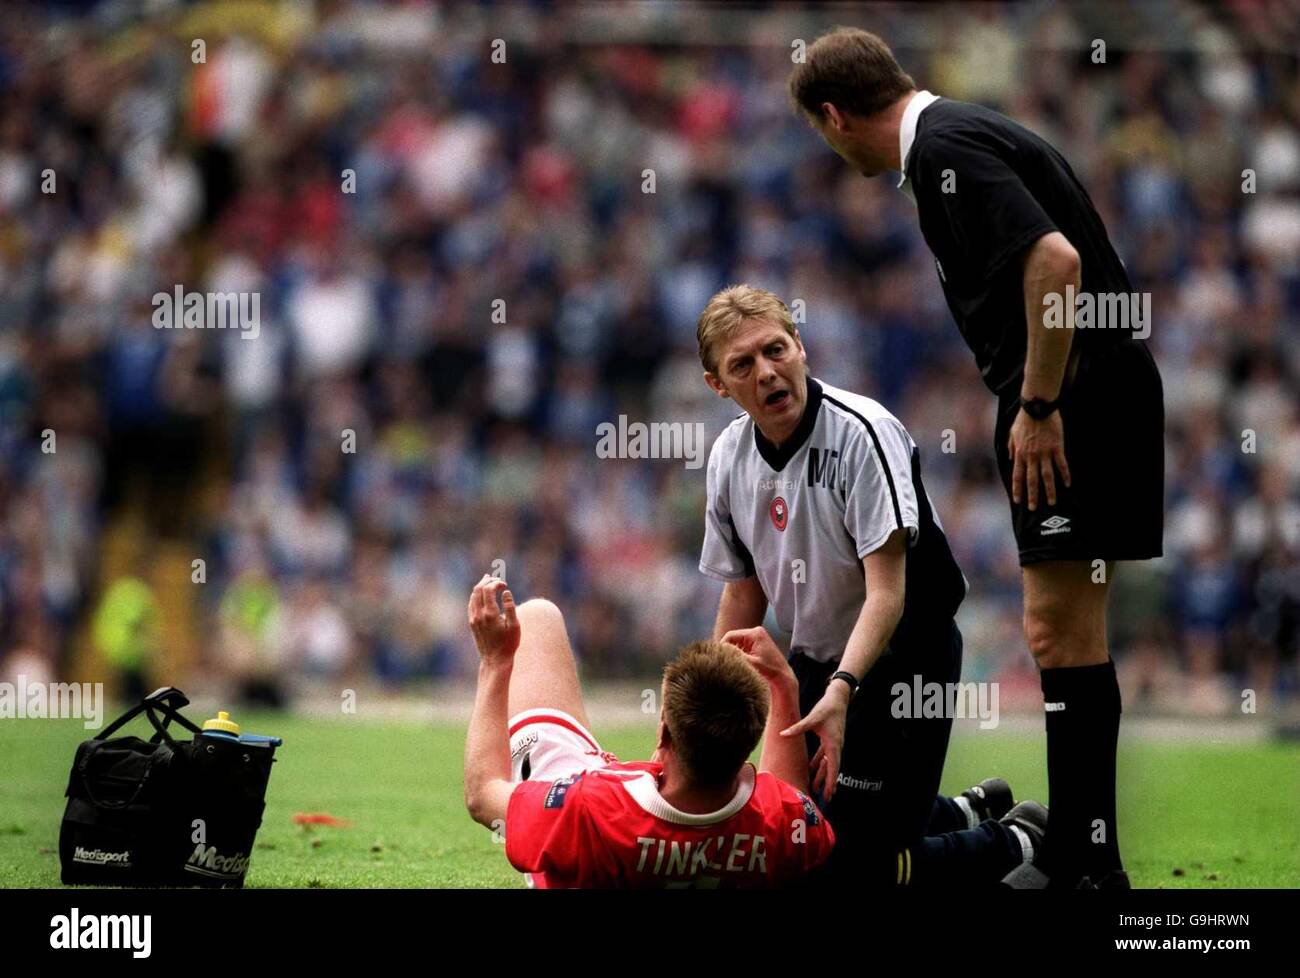 Barnsley's Erik Tinkler receives treatment from the physio as referee Mark Halsey enquires about the players condition Stock Photo